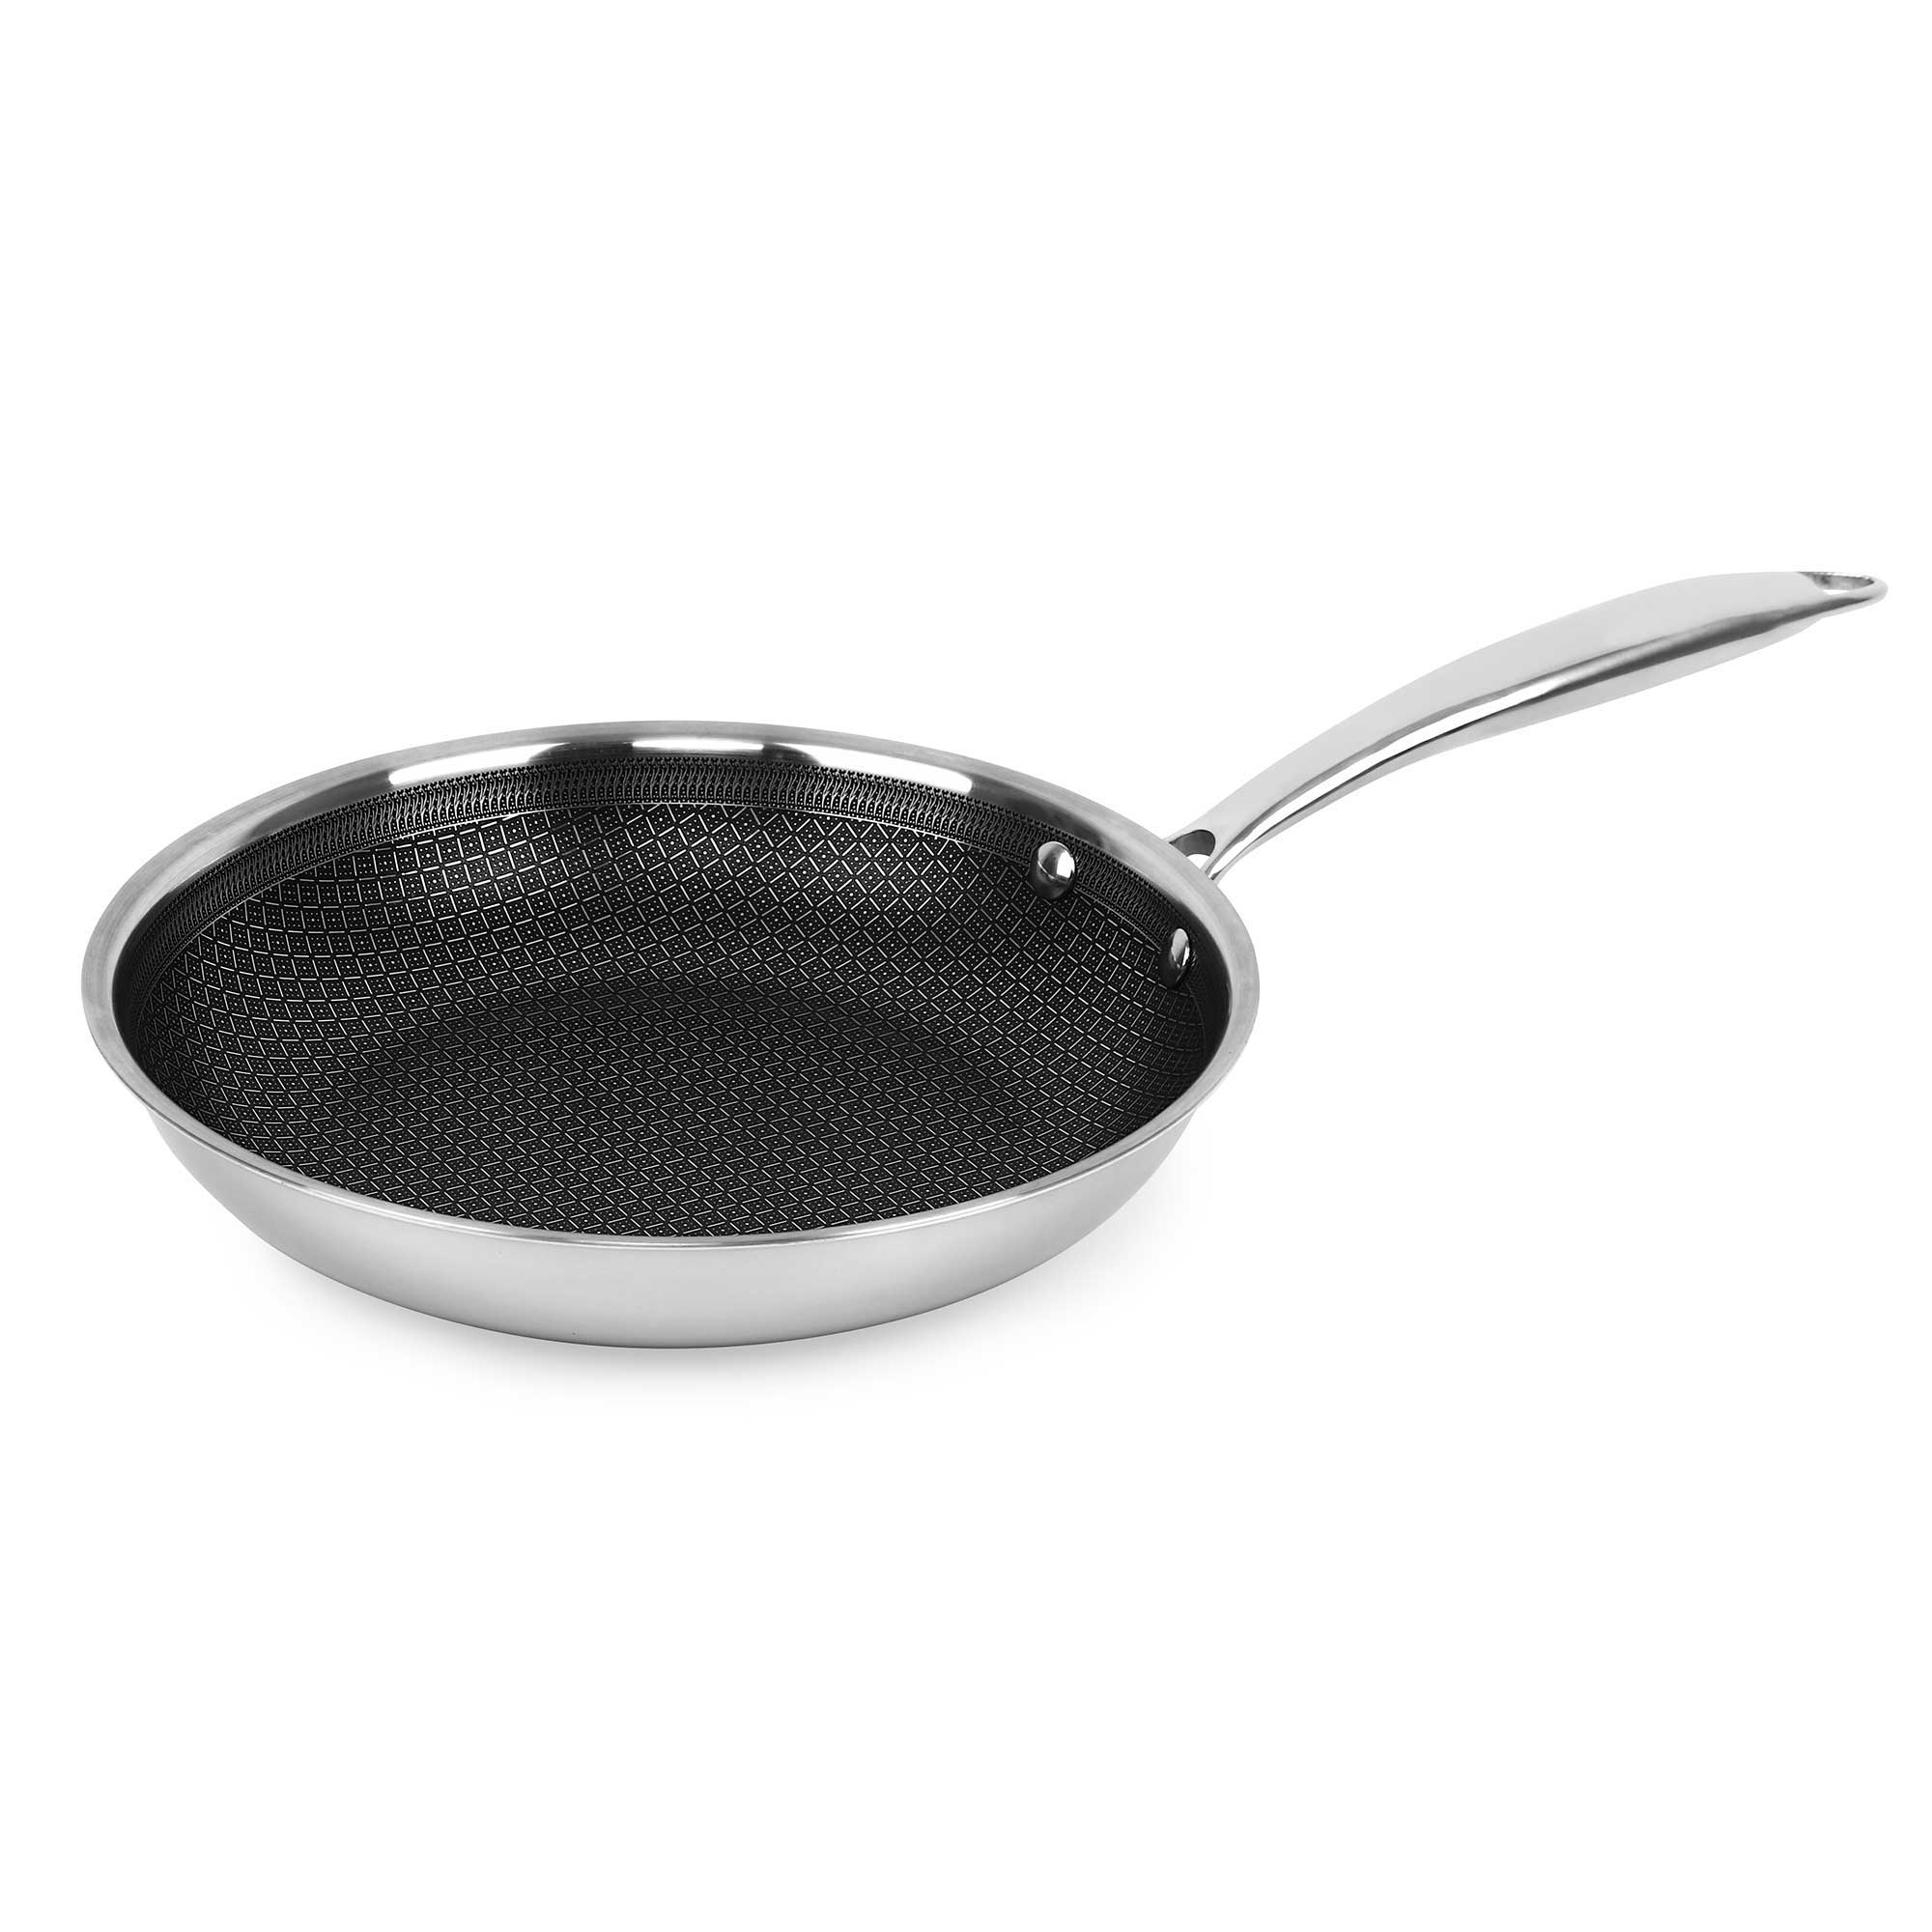 Brentwood B-FH24 9.5-inch 3-Ply Hybrid Non-Stick Stainless Steel Induction Ready Frying Pan